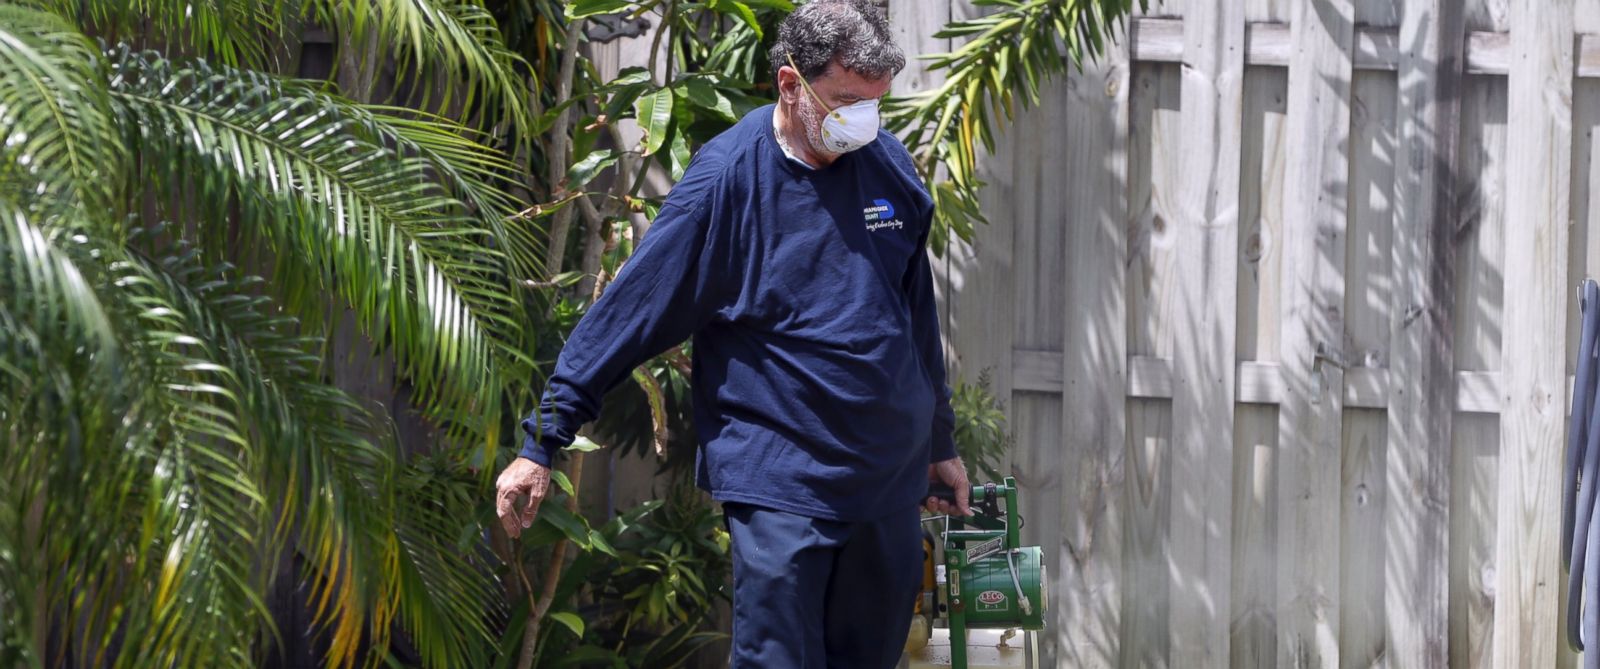 PHOTO: An inspector with the Miami- Dade County mosquito control unit, sprays pesticide in the yard of a home, April 12, 2016, in Miami, Florida. The NIH holds a briefing on the Zika Virus, May 3, 2016. 